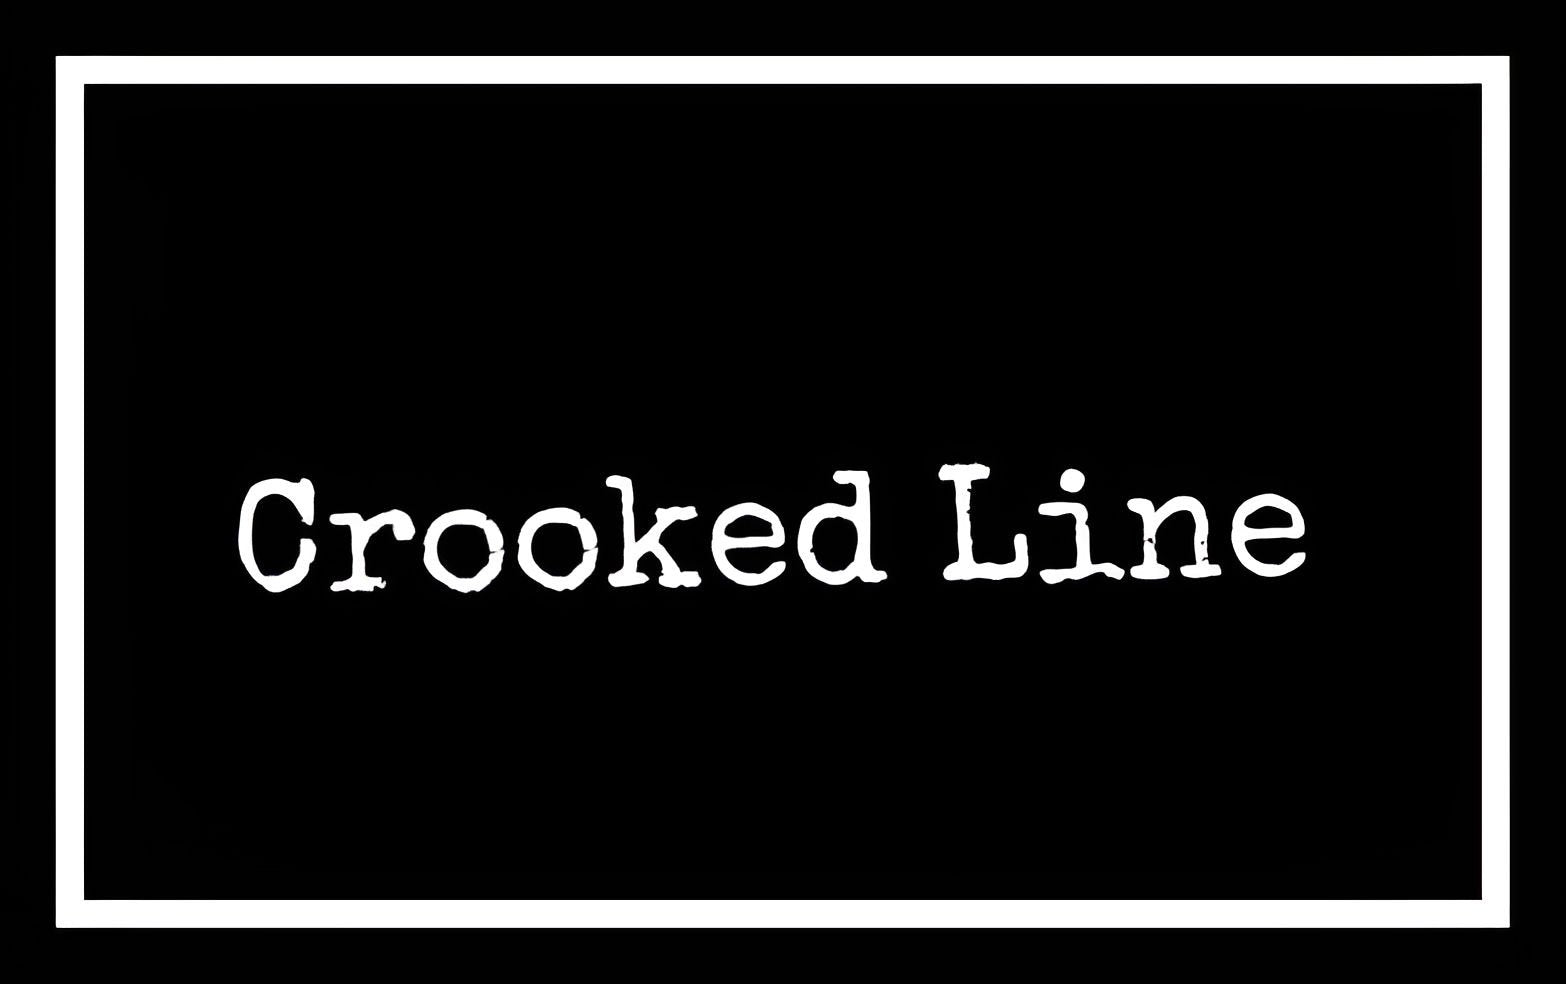 The Crooked Line 